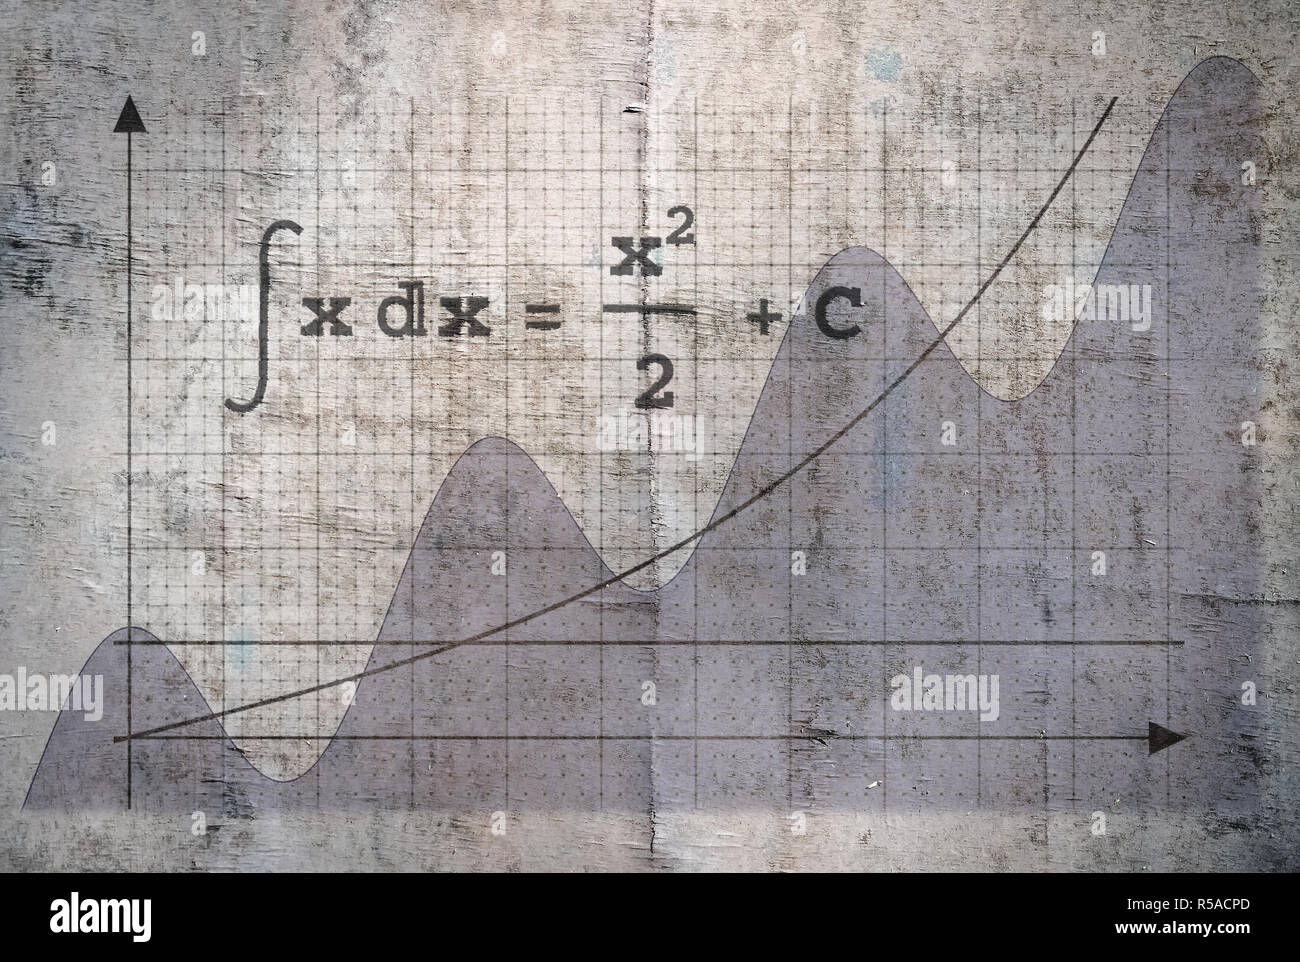 Example of an indefinite integral of a function on vintage background Stock Photo